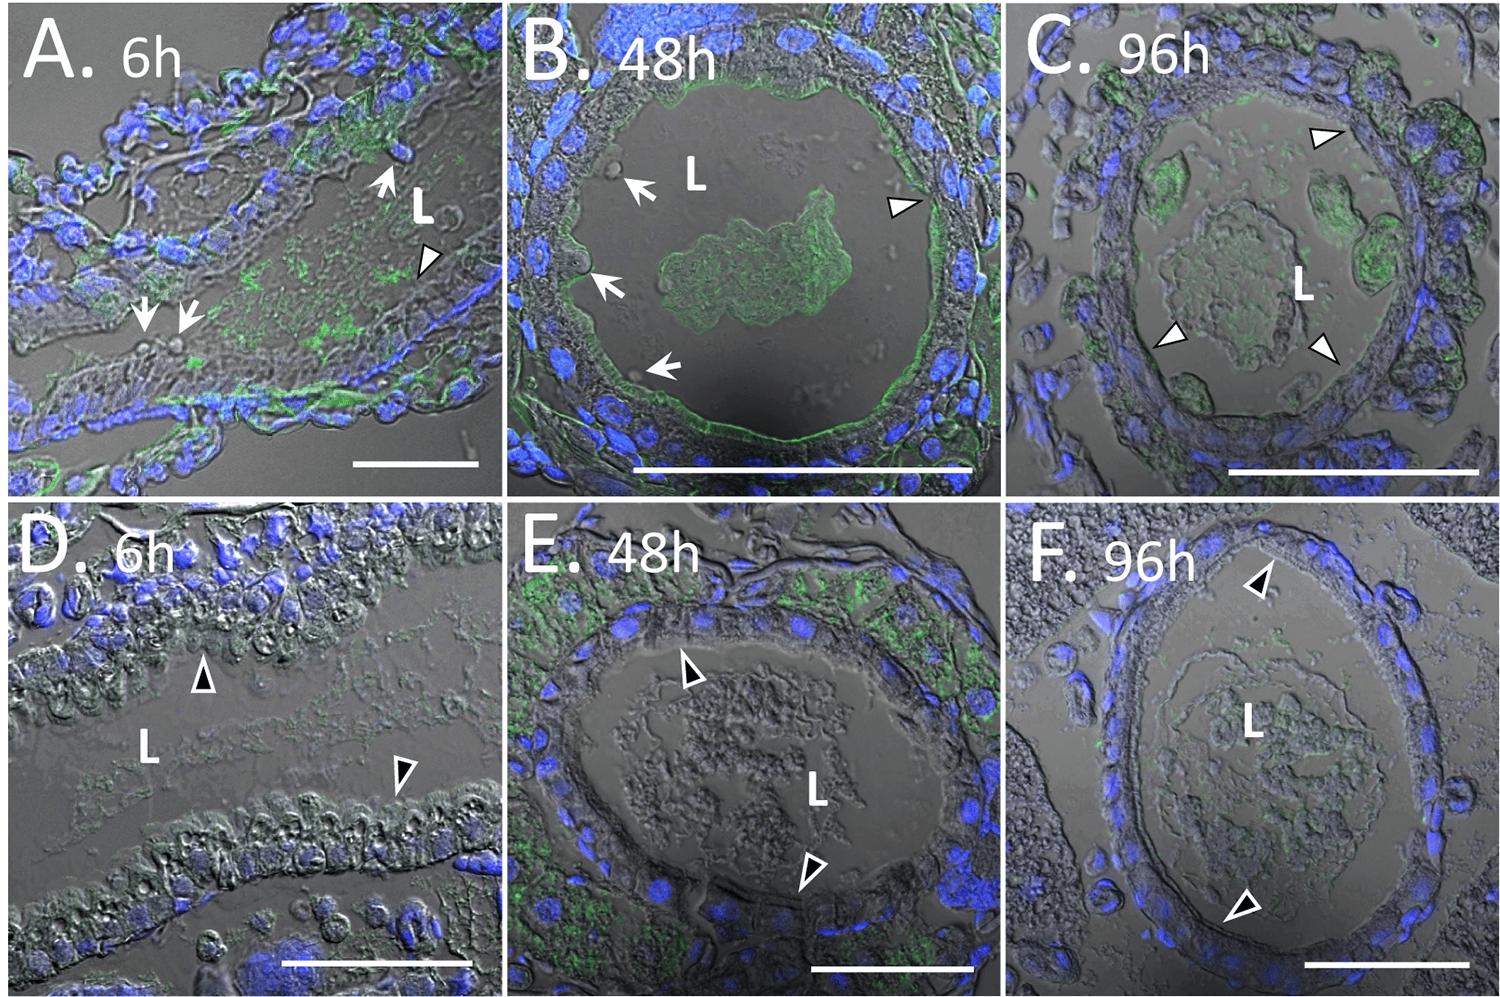 Western corn rootworm midgut morphology after feeding with Vpb4Da2. Vpb4Da2 staining by Alexa-fluor-488 conjugated secondary antibody is in green. Nuclei staining by DAPI is in blue. (A) Longitudinal section of the midgut after 6 h exposure to Vpb4Da2. (B) Cross section after 48 h exposure to Vpb4Da2. (C) Cross section after 96 h exposure to Vpb4Da2. (A) and (B) White arrows indicate blebbing of the epithelial cells. (A), (B) and (C) White arrowheads designate a complete or near complete loss of the apical microvilli layer. (D), (E), and (F) Are untreated controls where black arrowheads indicate the intact apical microvilli layer. Scale bars are all 50 μm.
Source: <b>Structural and functional insights into the first Bacillus thuringiensis vegetative insecticidal protein of the Vpb4 fold, active against western corn rootworm</b> by
Kouadio JL, Zheng M, Aikins M, Duda D, Duff S, et al. <em>PLOS ONE</em> Dec. 2021.